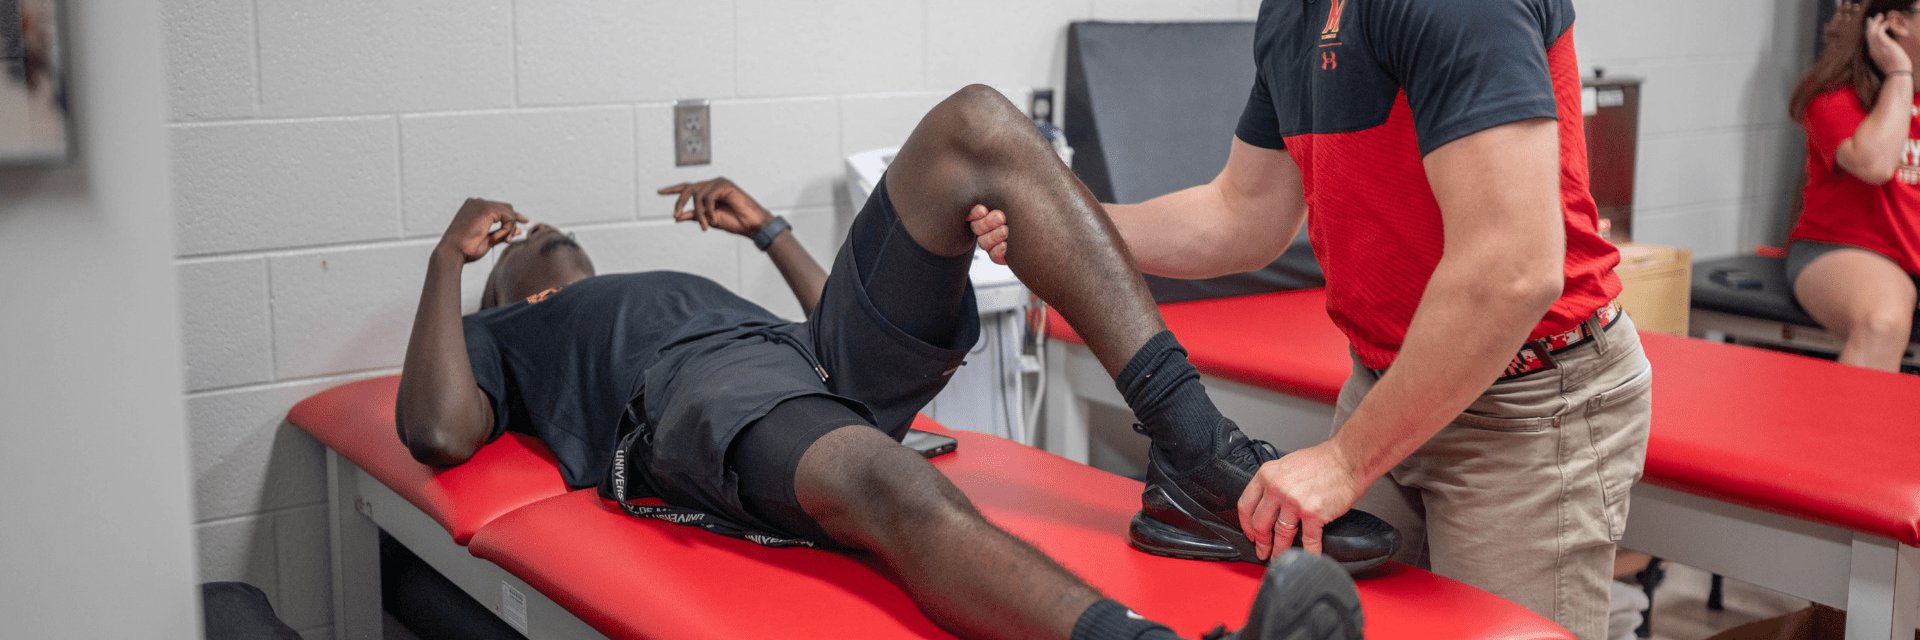 Athletic trainer consults young male with leg injury